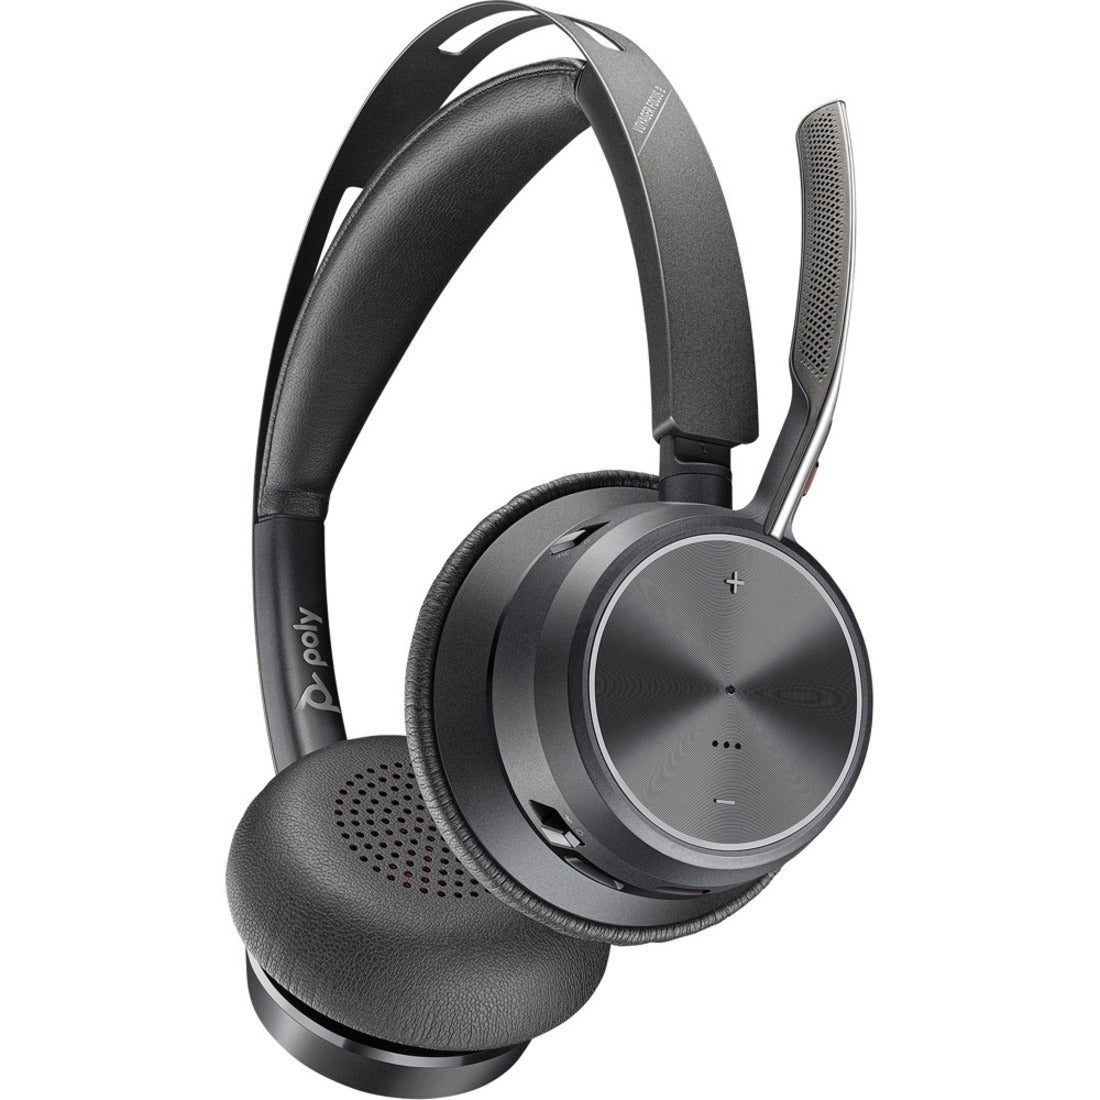 Poly 214433-02 Voyager Focus 2 Headset, Wireless Bluetooth Headphones with Noise Cancelling, Comfortable and Rechargeable